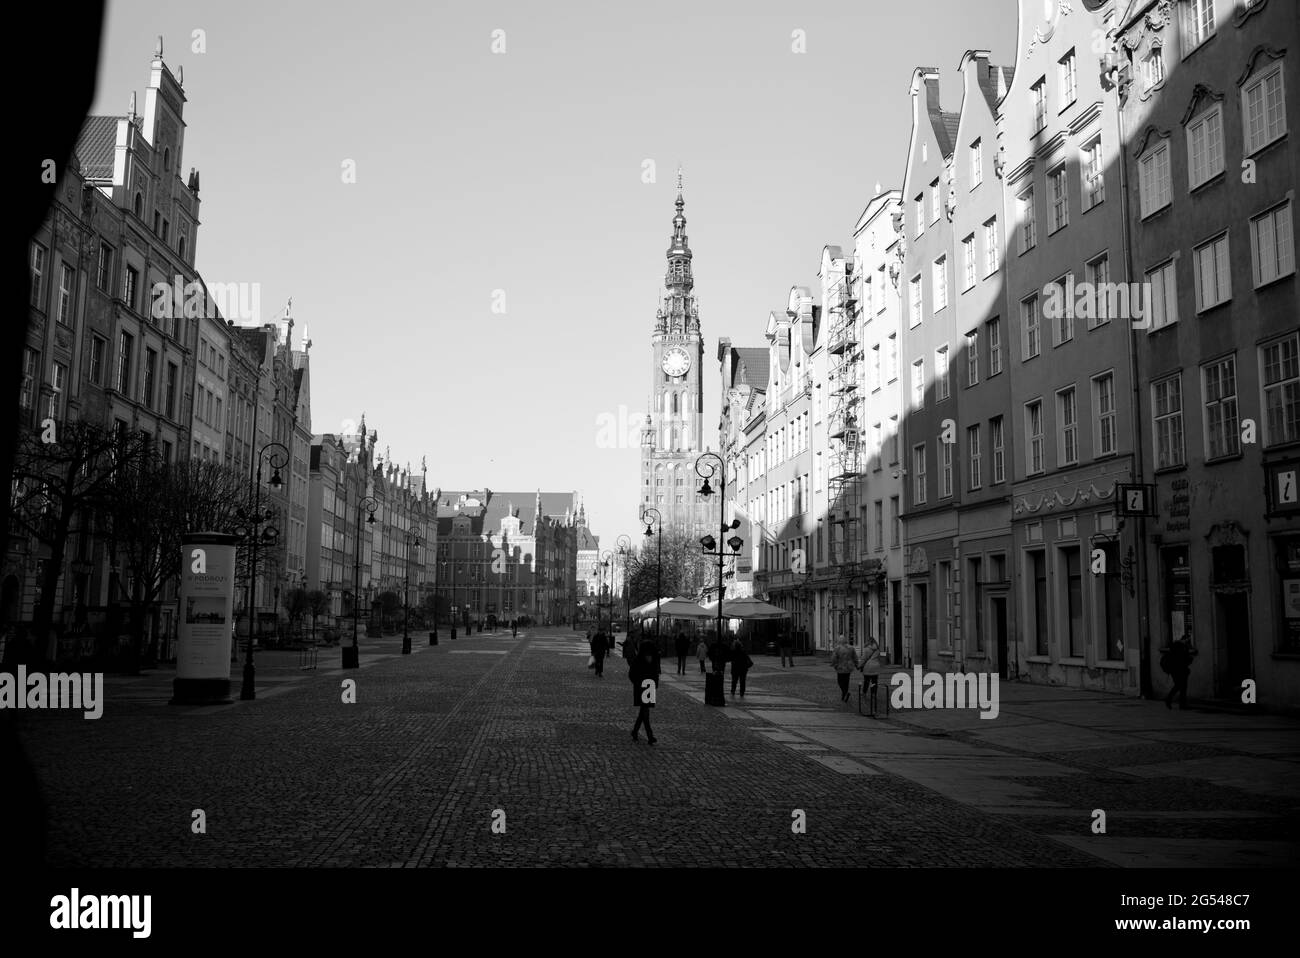 view of Gdansk City Hall, looking down Ulica Dluga, Gdansk, Poland Stock Photo